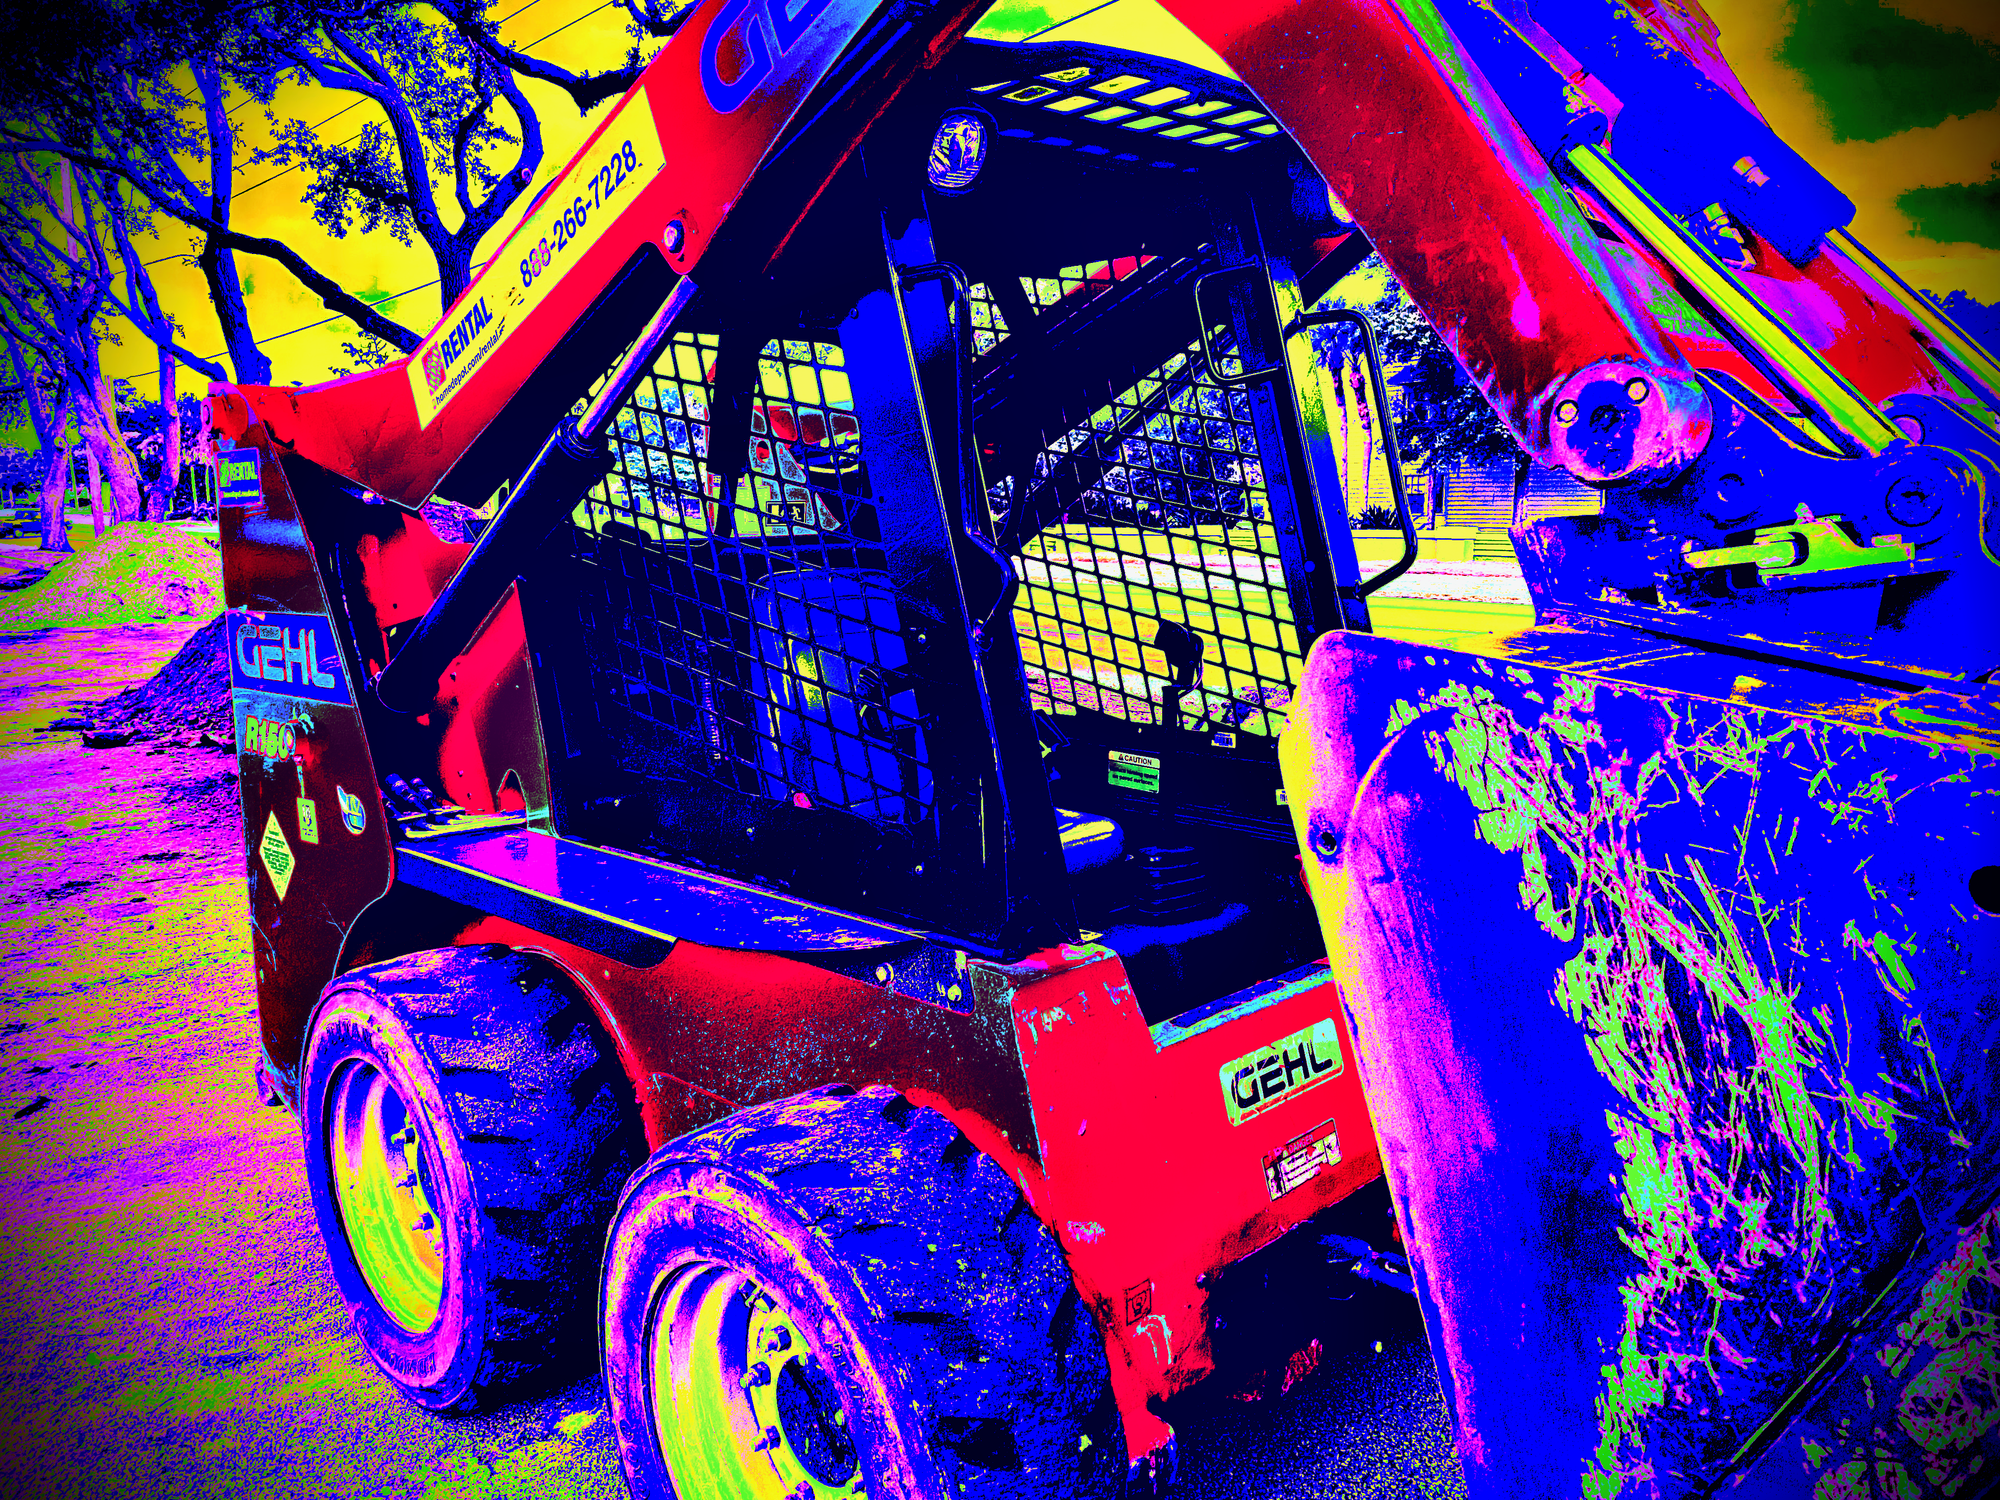 Sci-fi twist and artistic aesthetic on a land clearing tractor (mulching tractor)